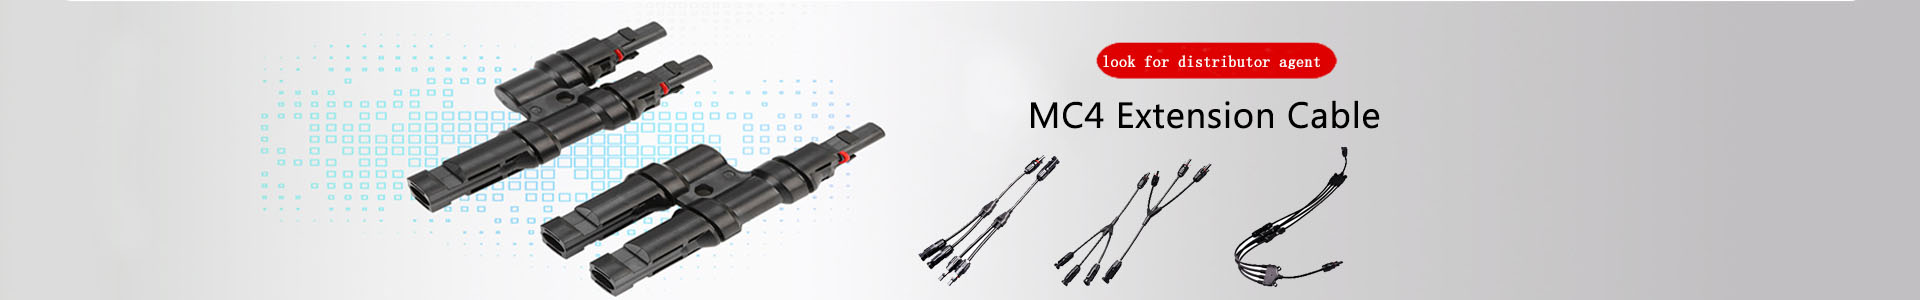 Photovoltaic adapter manufacturing process-Company news-Solar | solar connector,solar branch connector,diode fuse connector,MC4 extnsion cable,H1Z2Z2 solar cable, UL4703 solar cable | Leading manufacturer and supplier of solar pv cables and connectors